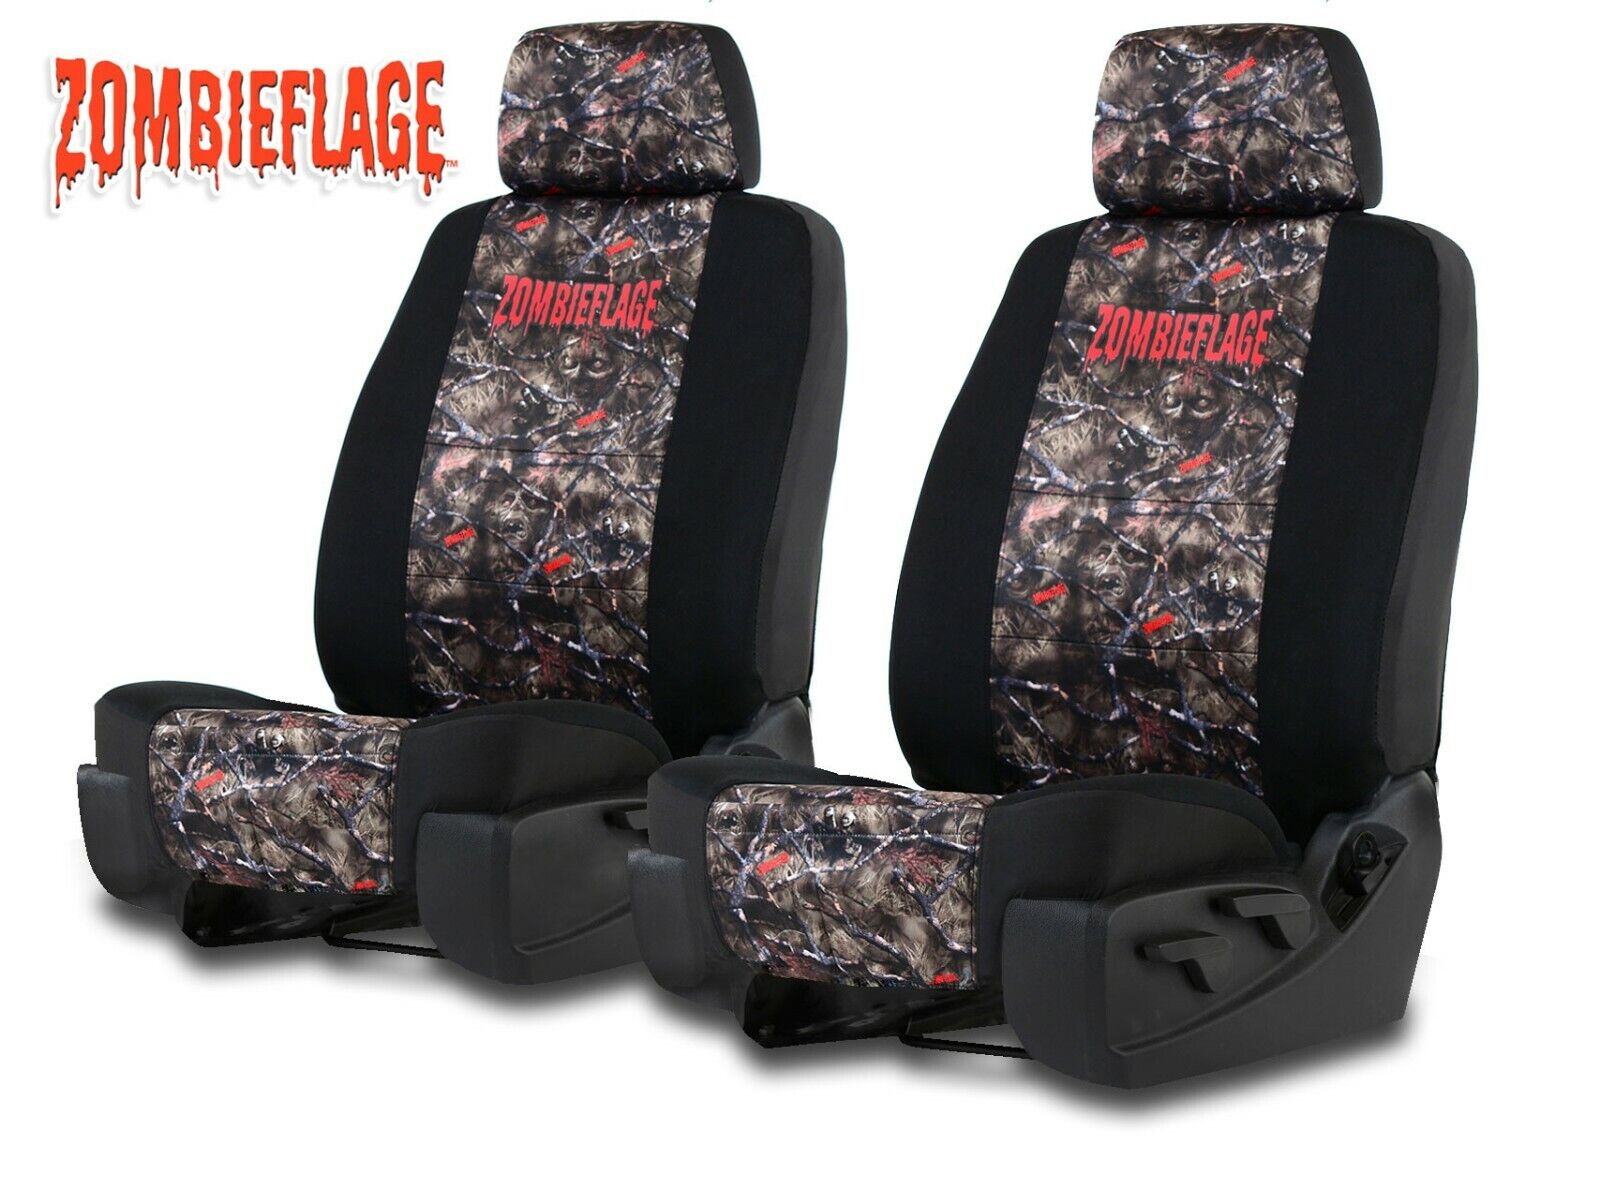 NEOPRENE ZOMBIE CAMO SEAT COVERS for Standard Bucket Seats with Headrests